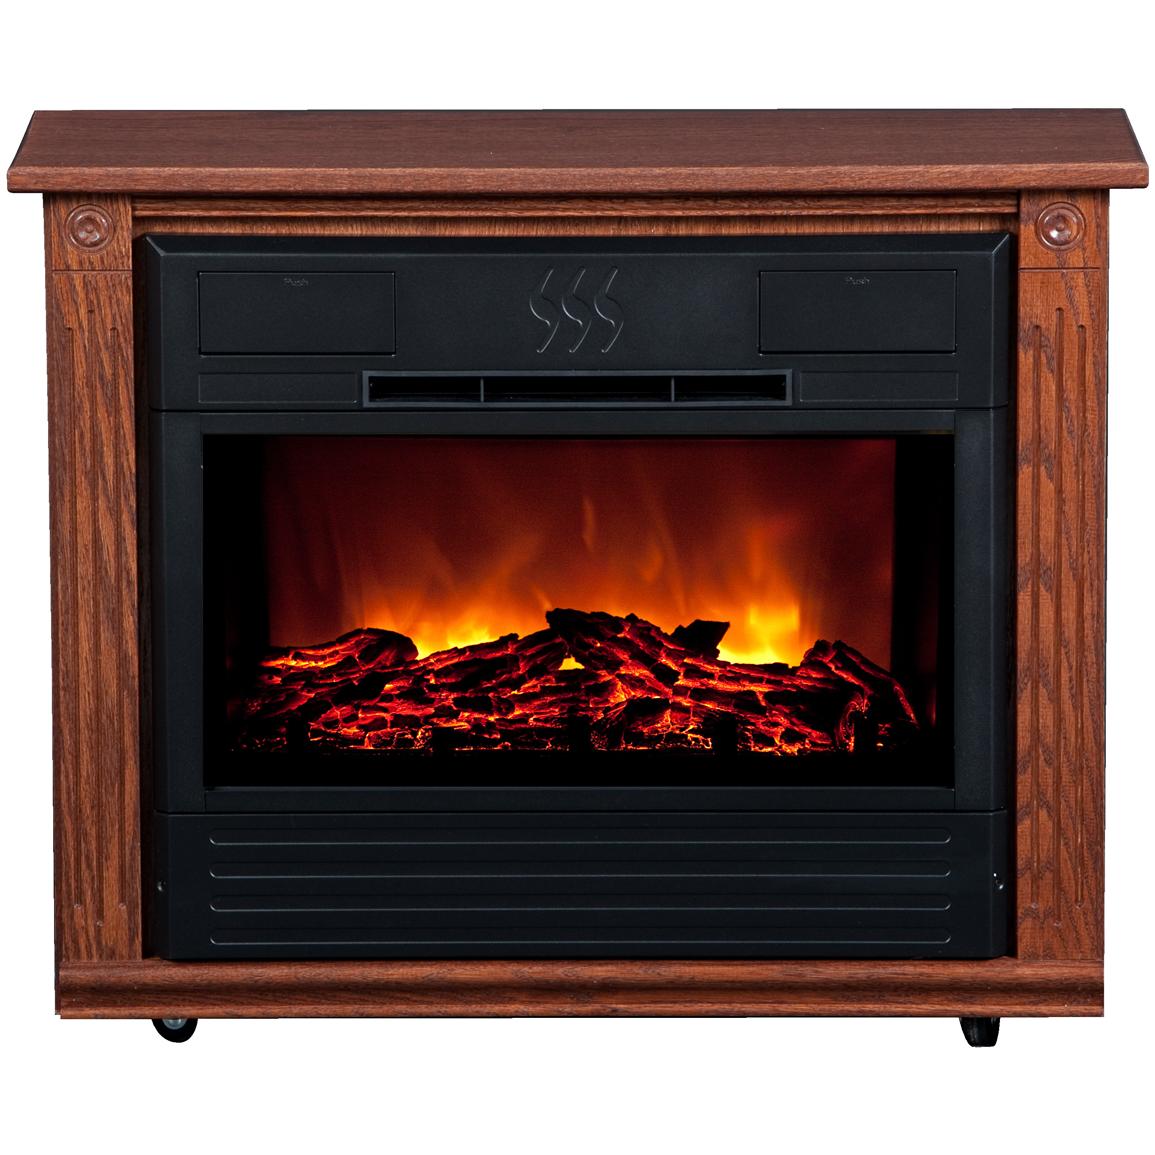  Fireplaces at Sportsman